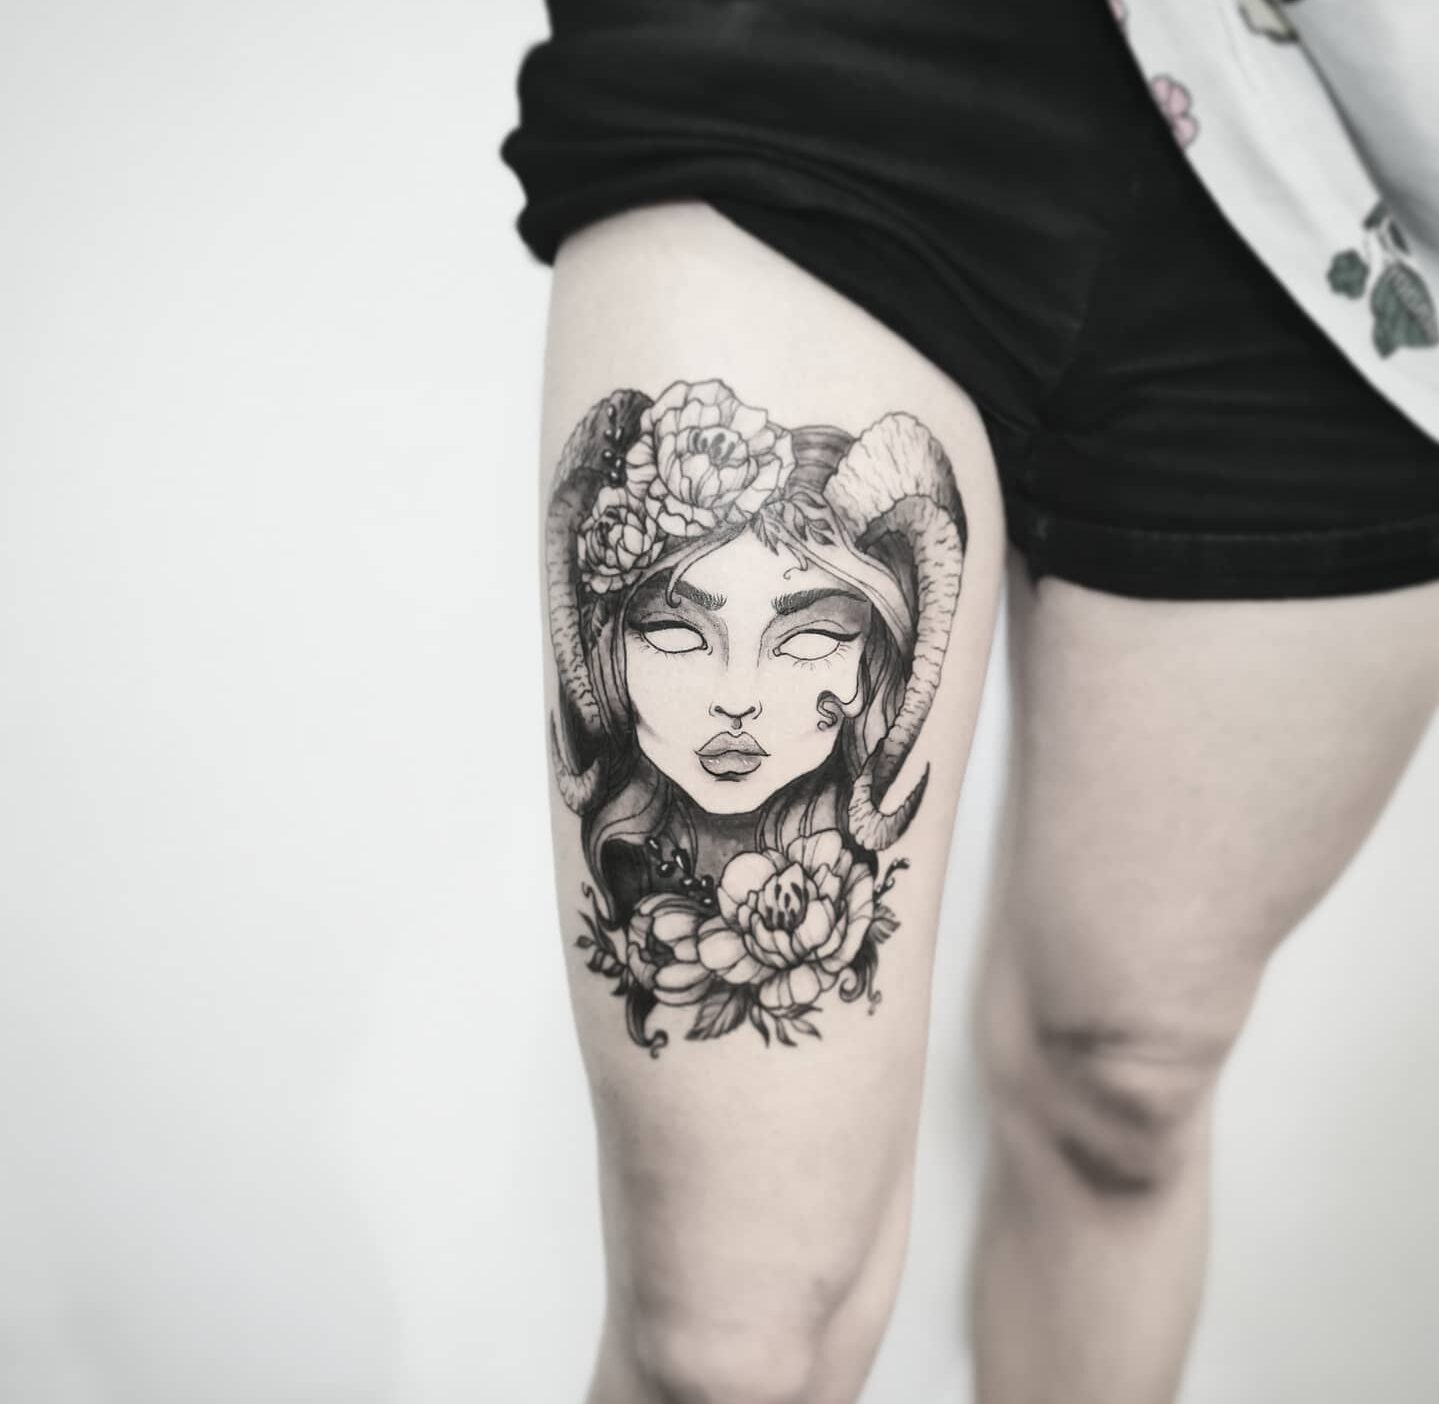 Capricorn Goddess and flowers tattoo located on the thigh